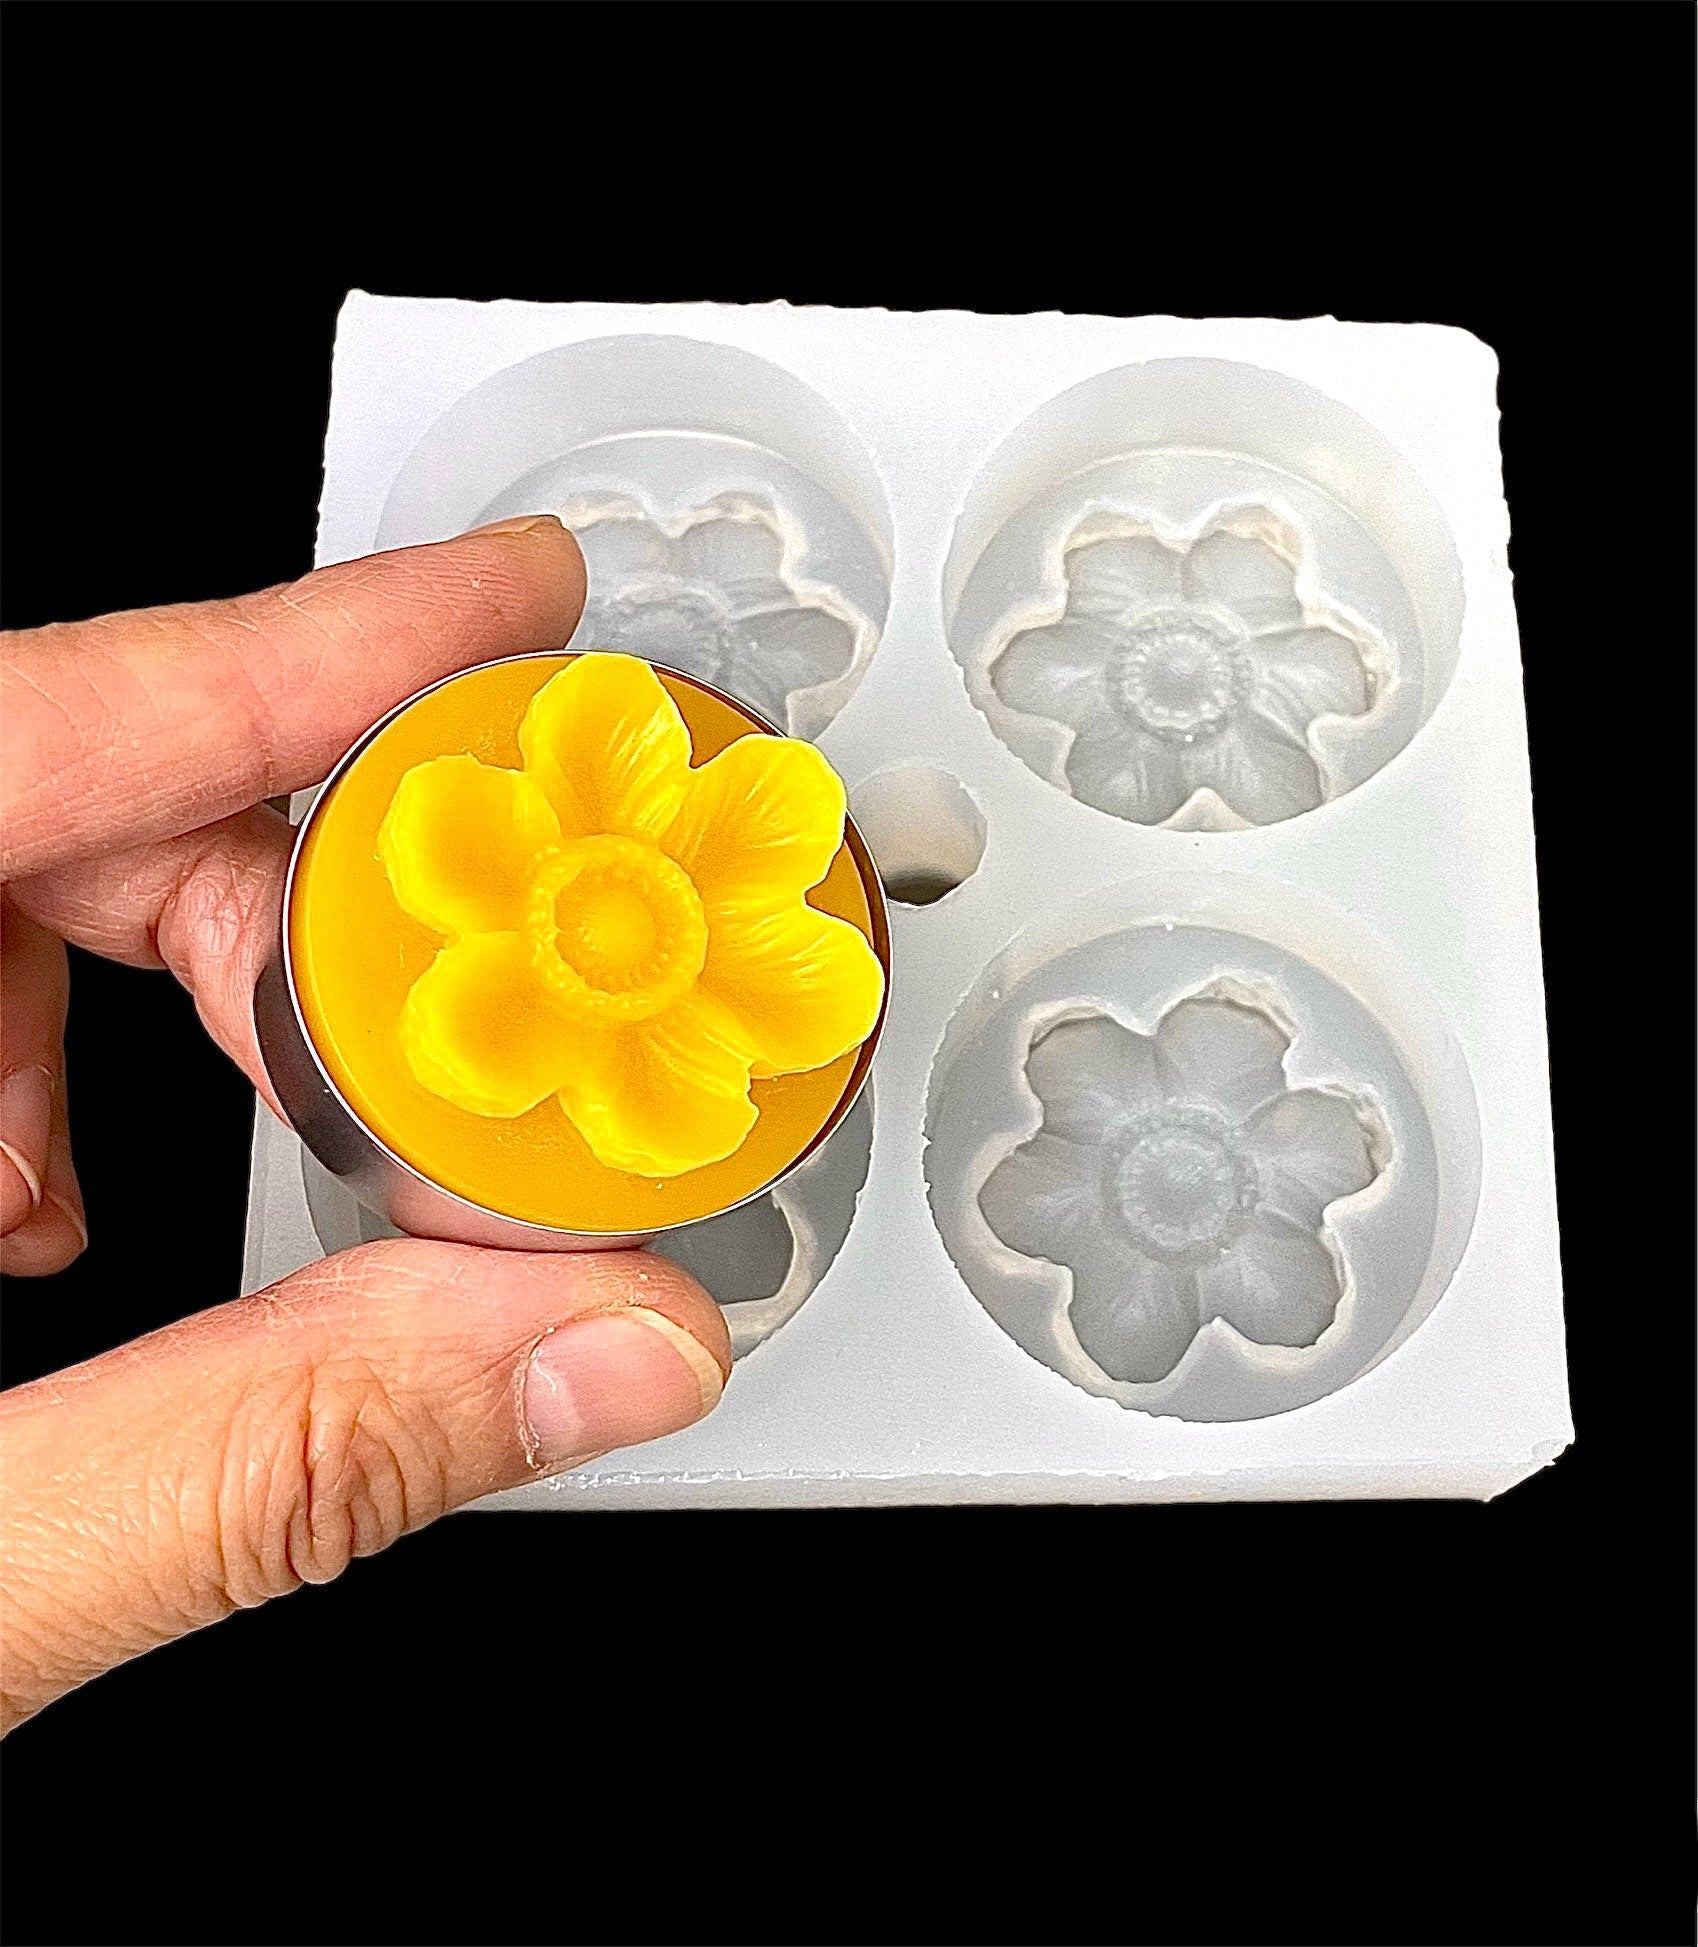 handmade flower candle mold flower silicone